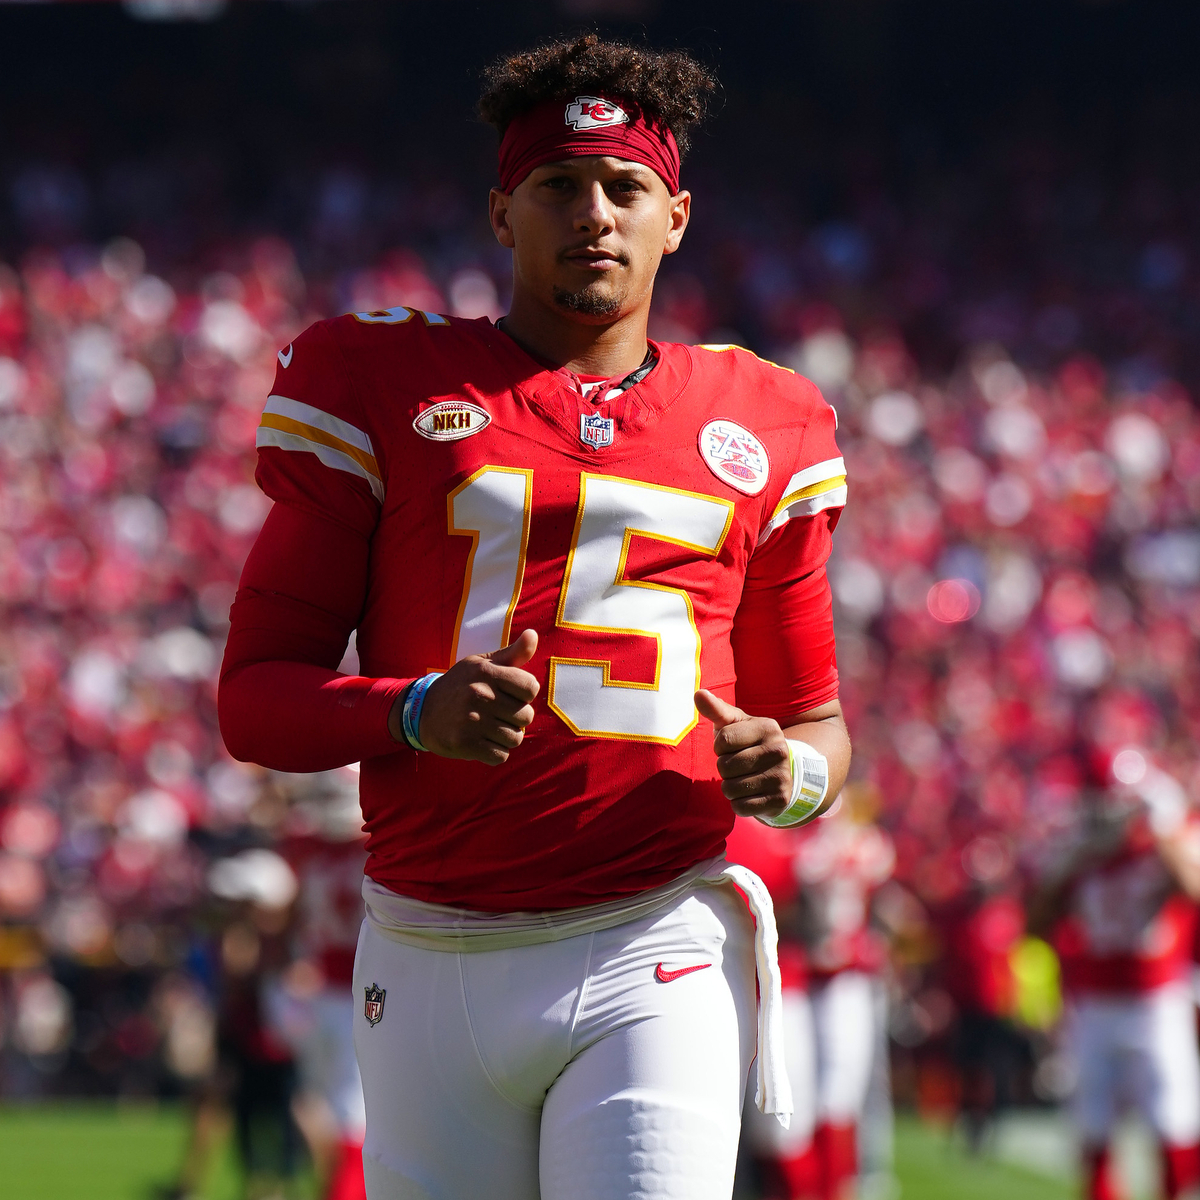 Proof Patrick Mahomes Was Enchanted to Meet Taylor Swift at NFL Party